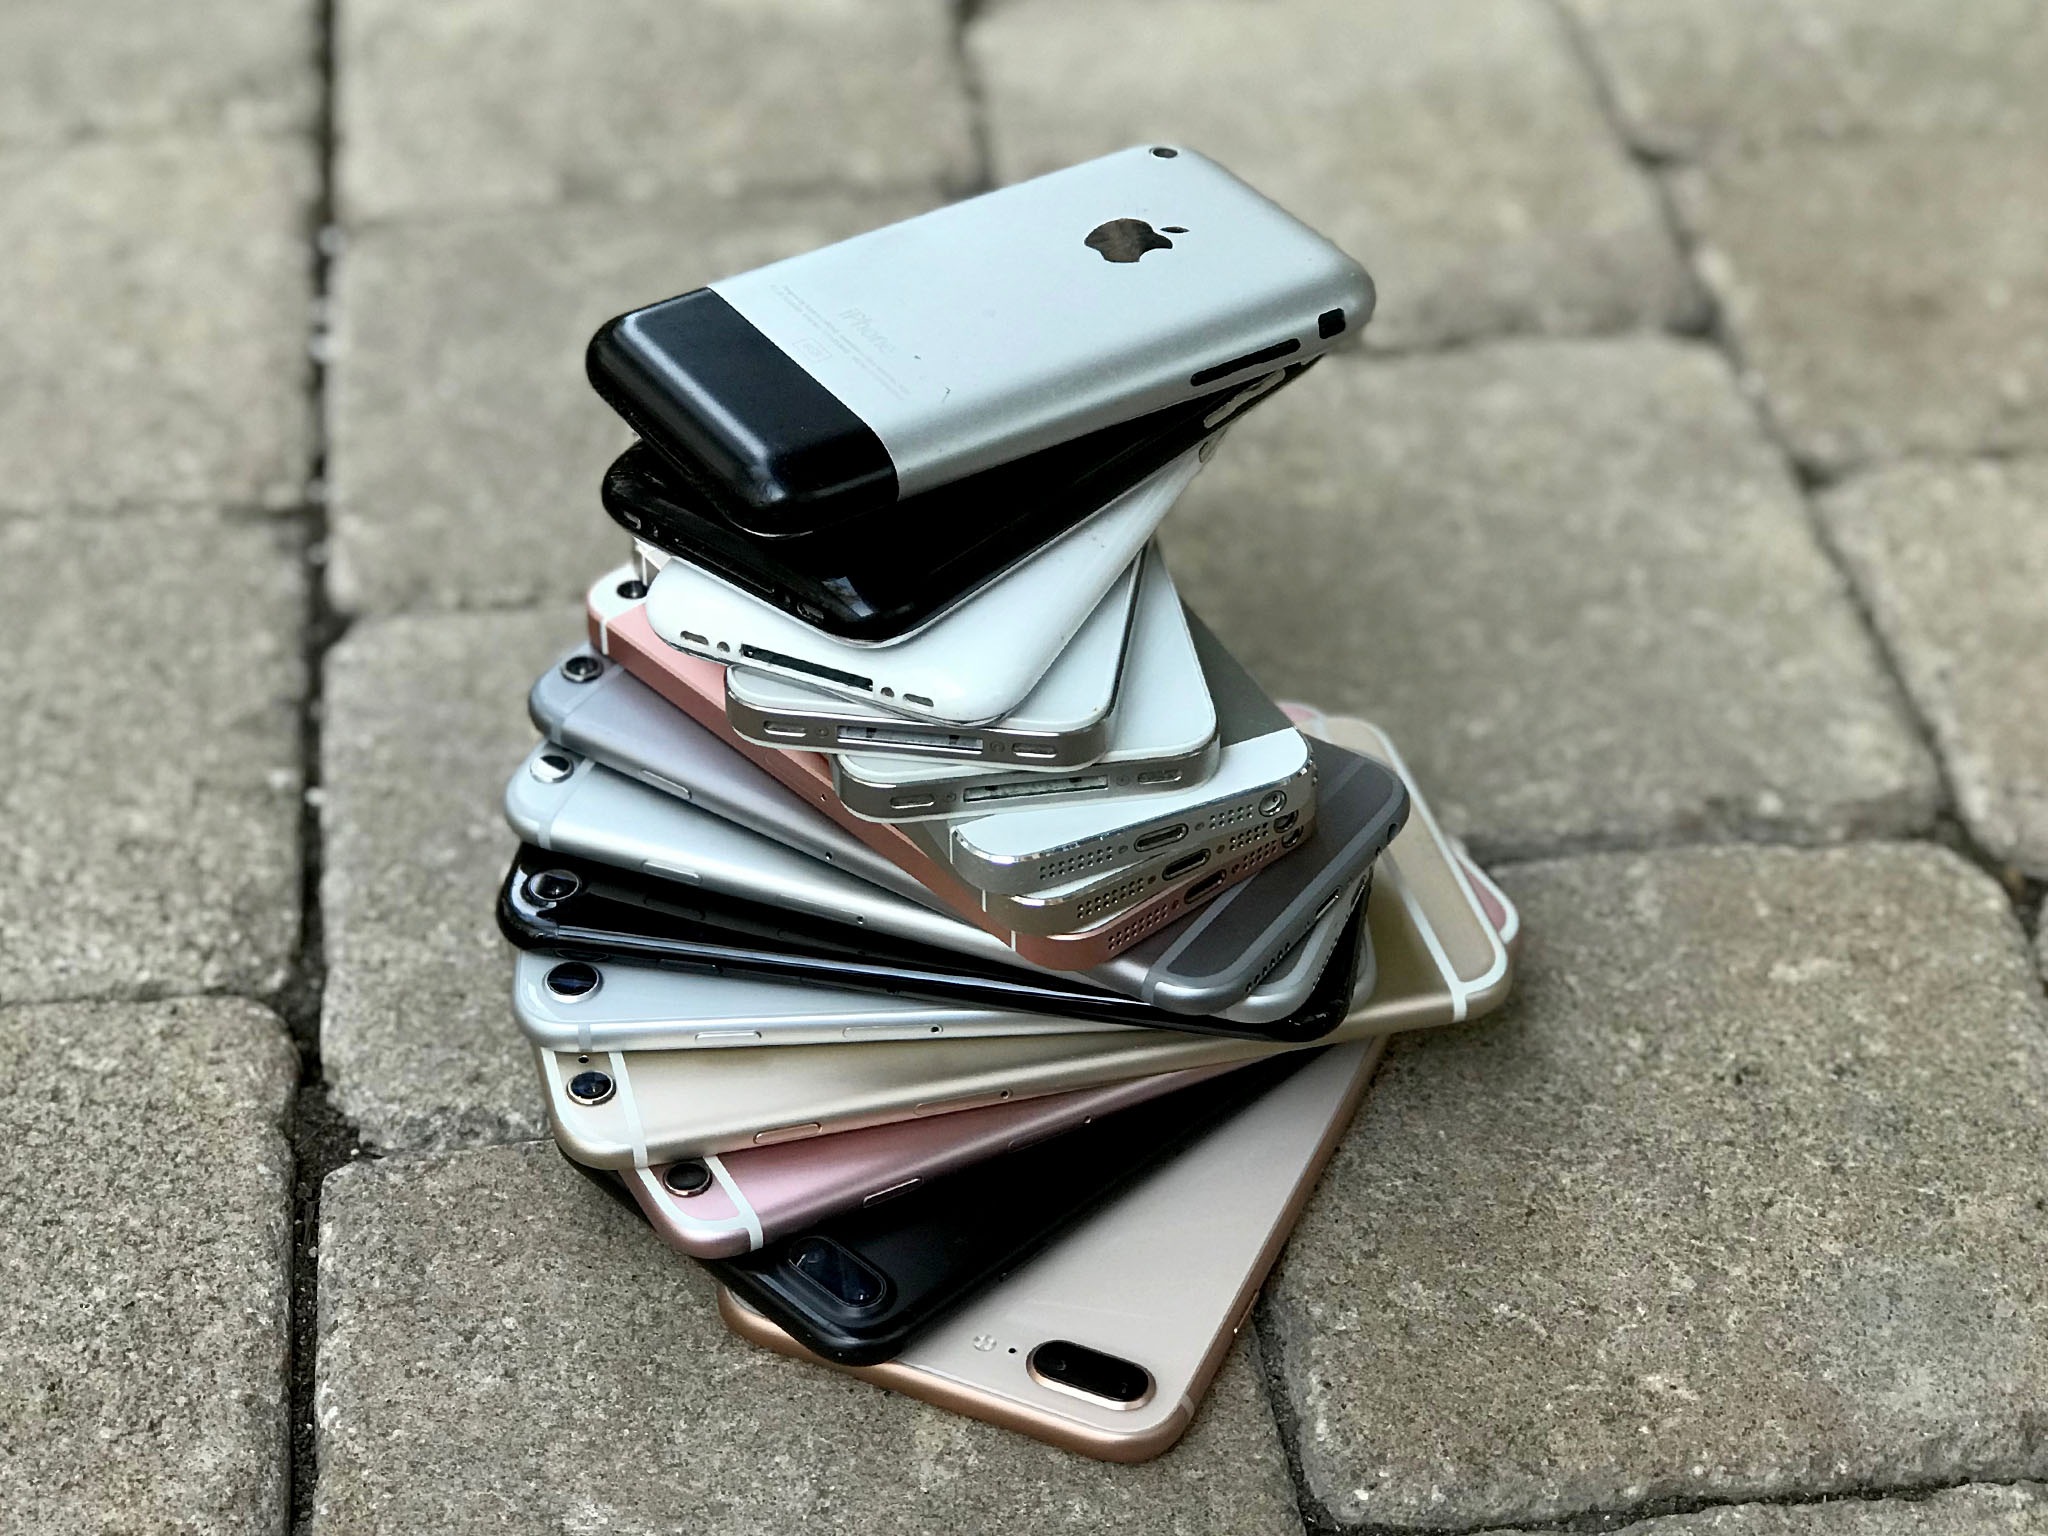 All the iPhones